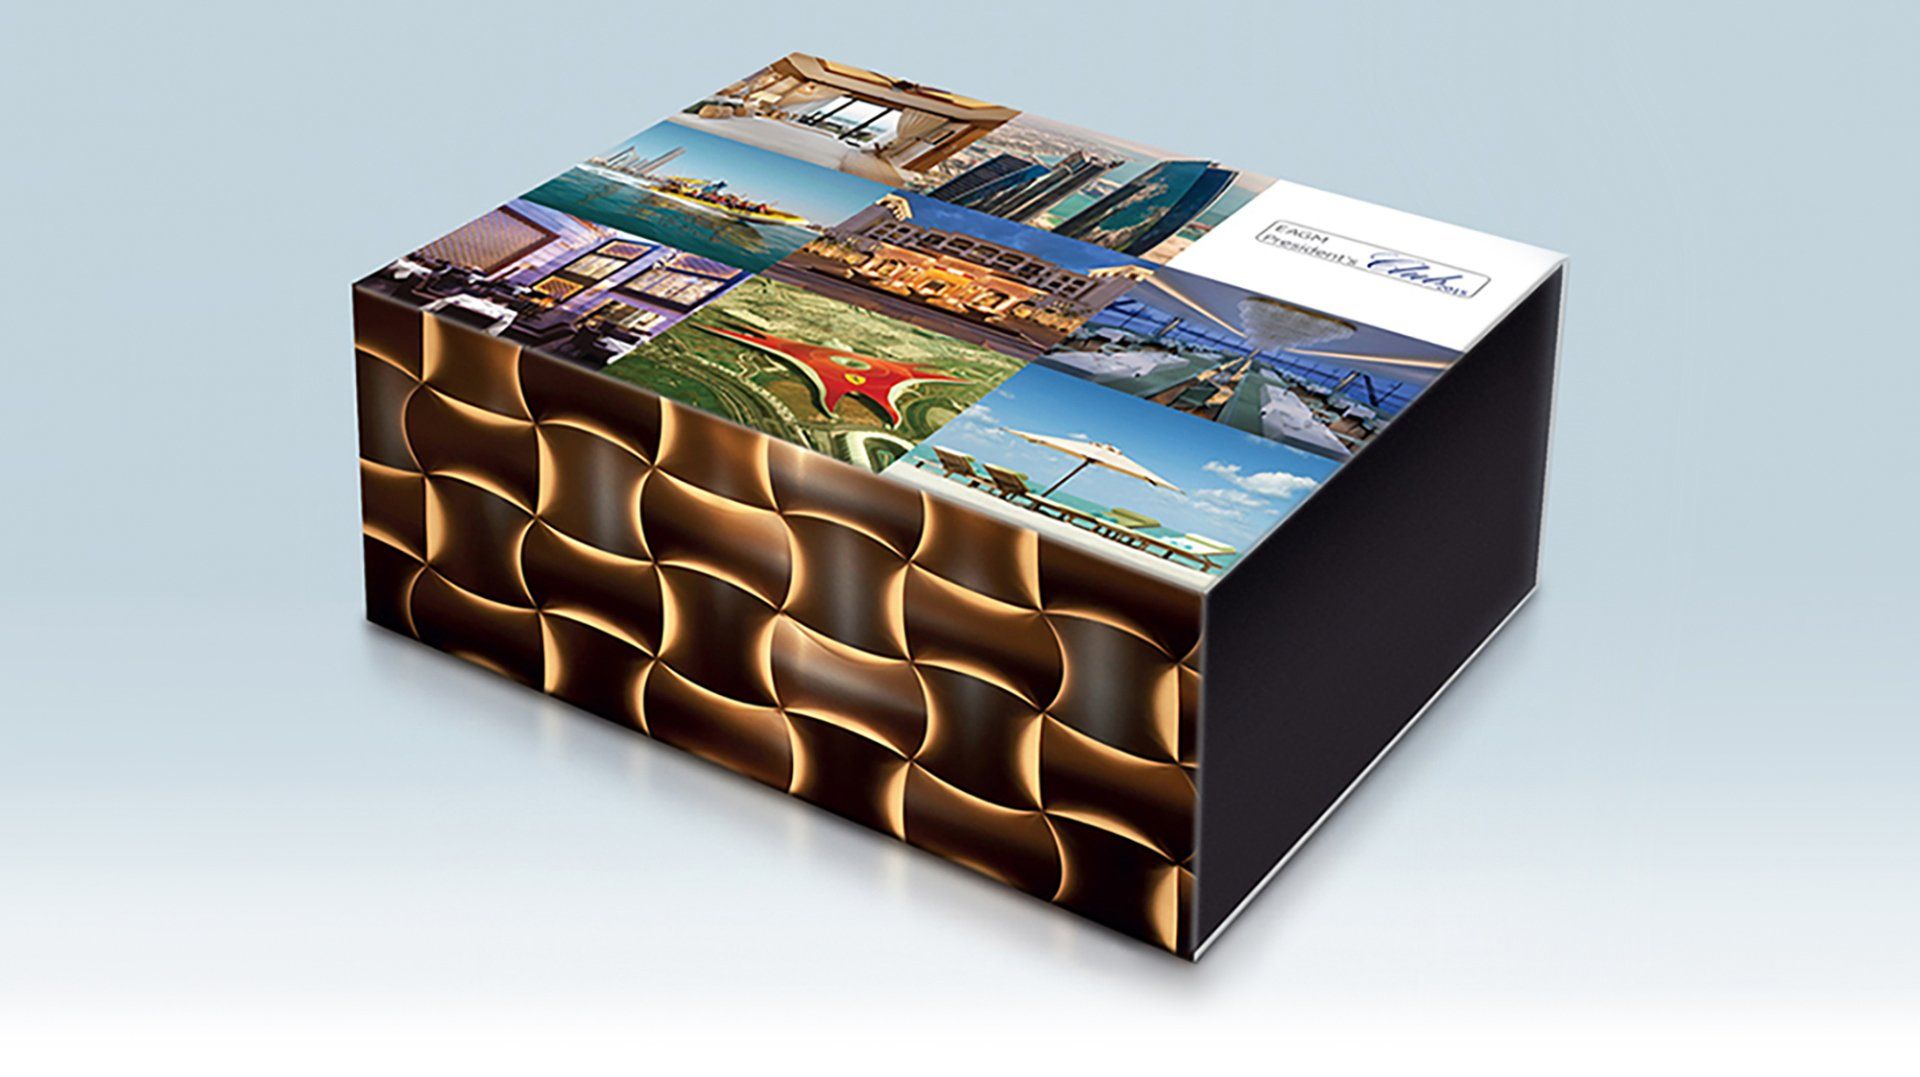 Promotional gift pack design & packaging print, box sleeve